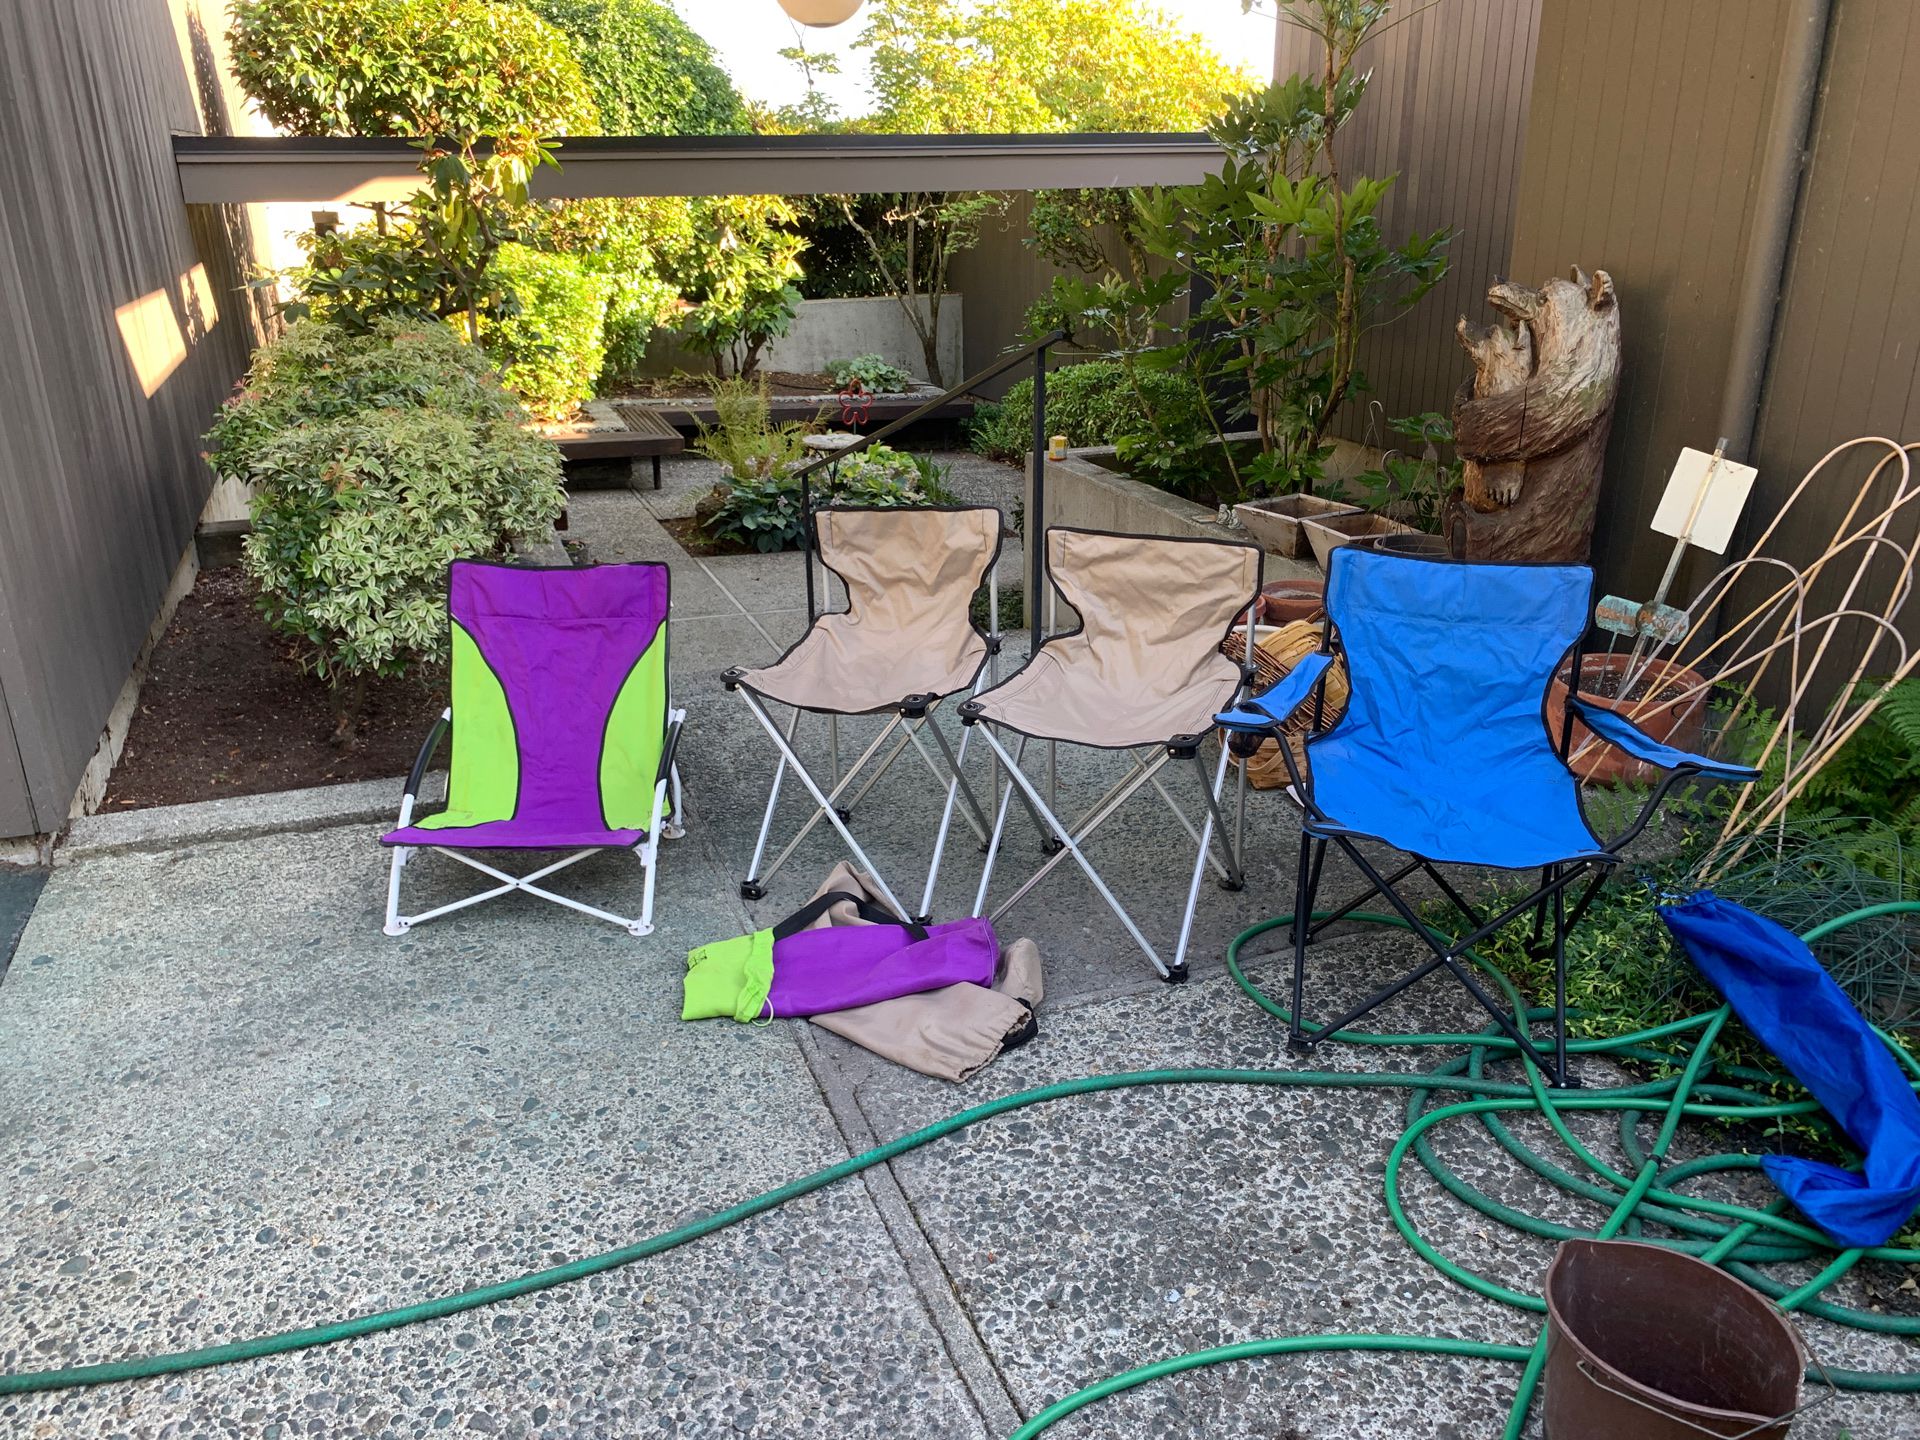 Camping Chairs $5 each